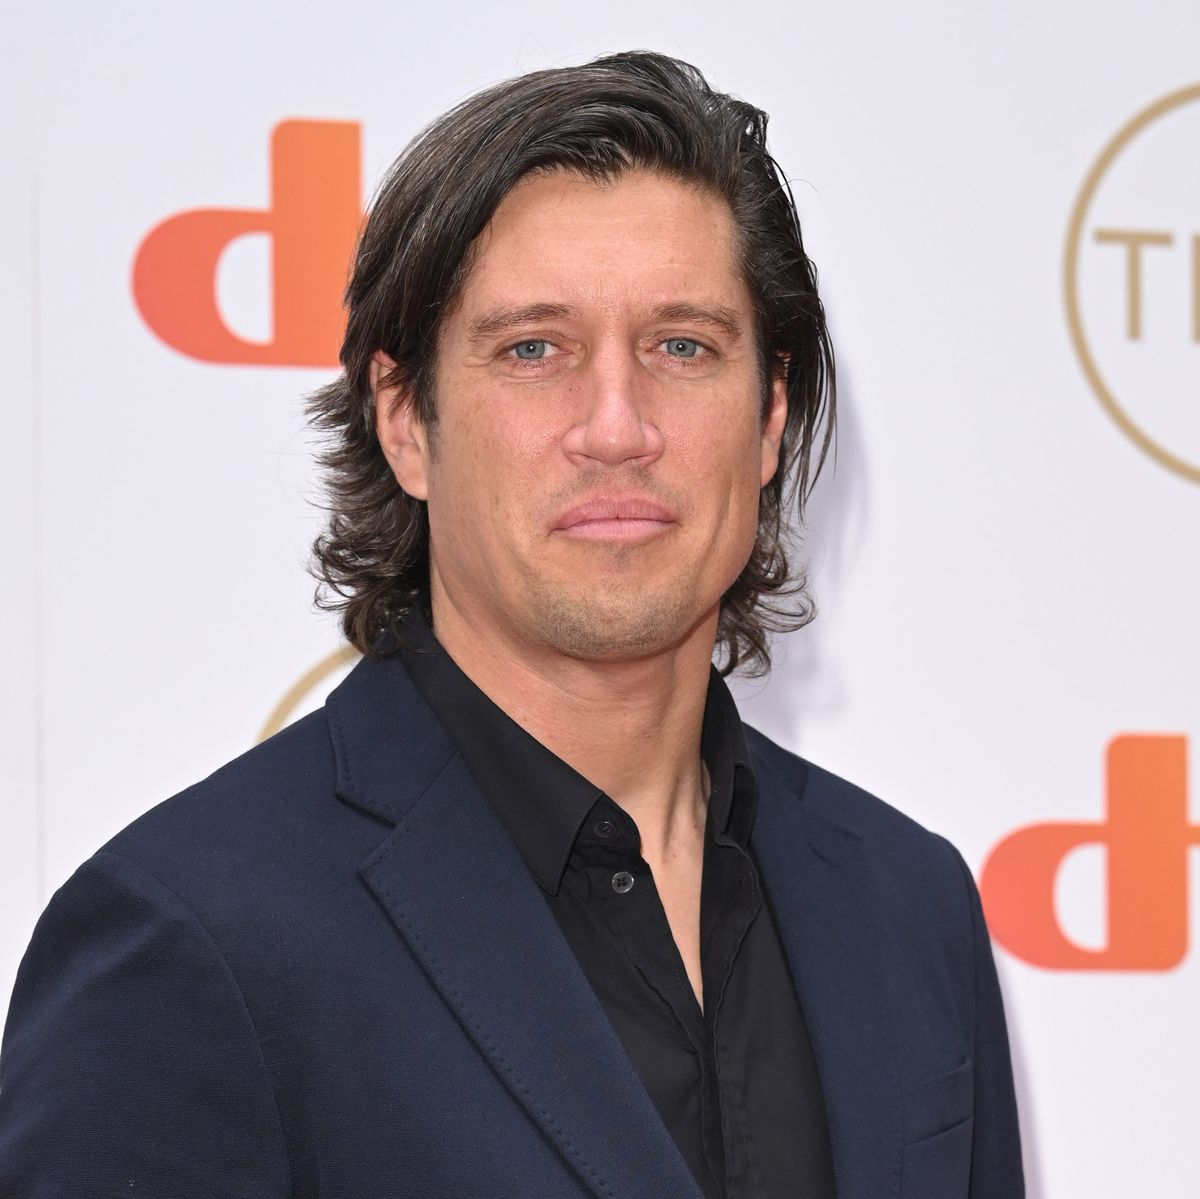 vernon kay at the tric awards 2021